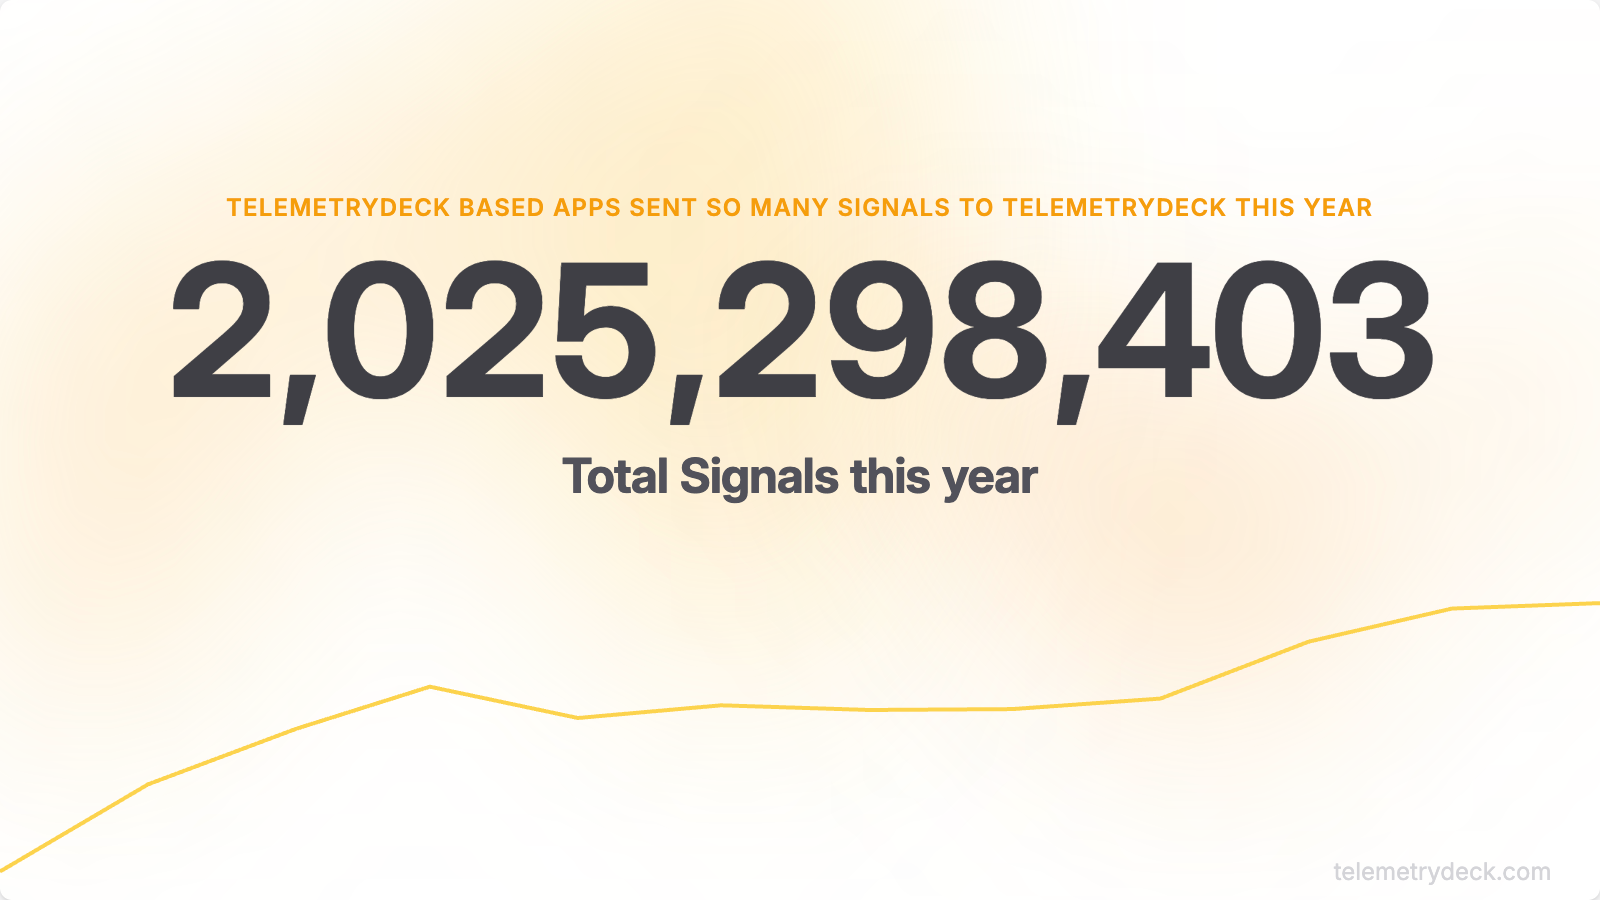 TelemetryDeck apps sent 2,025,298,403 Total Signals this year